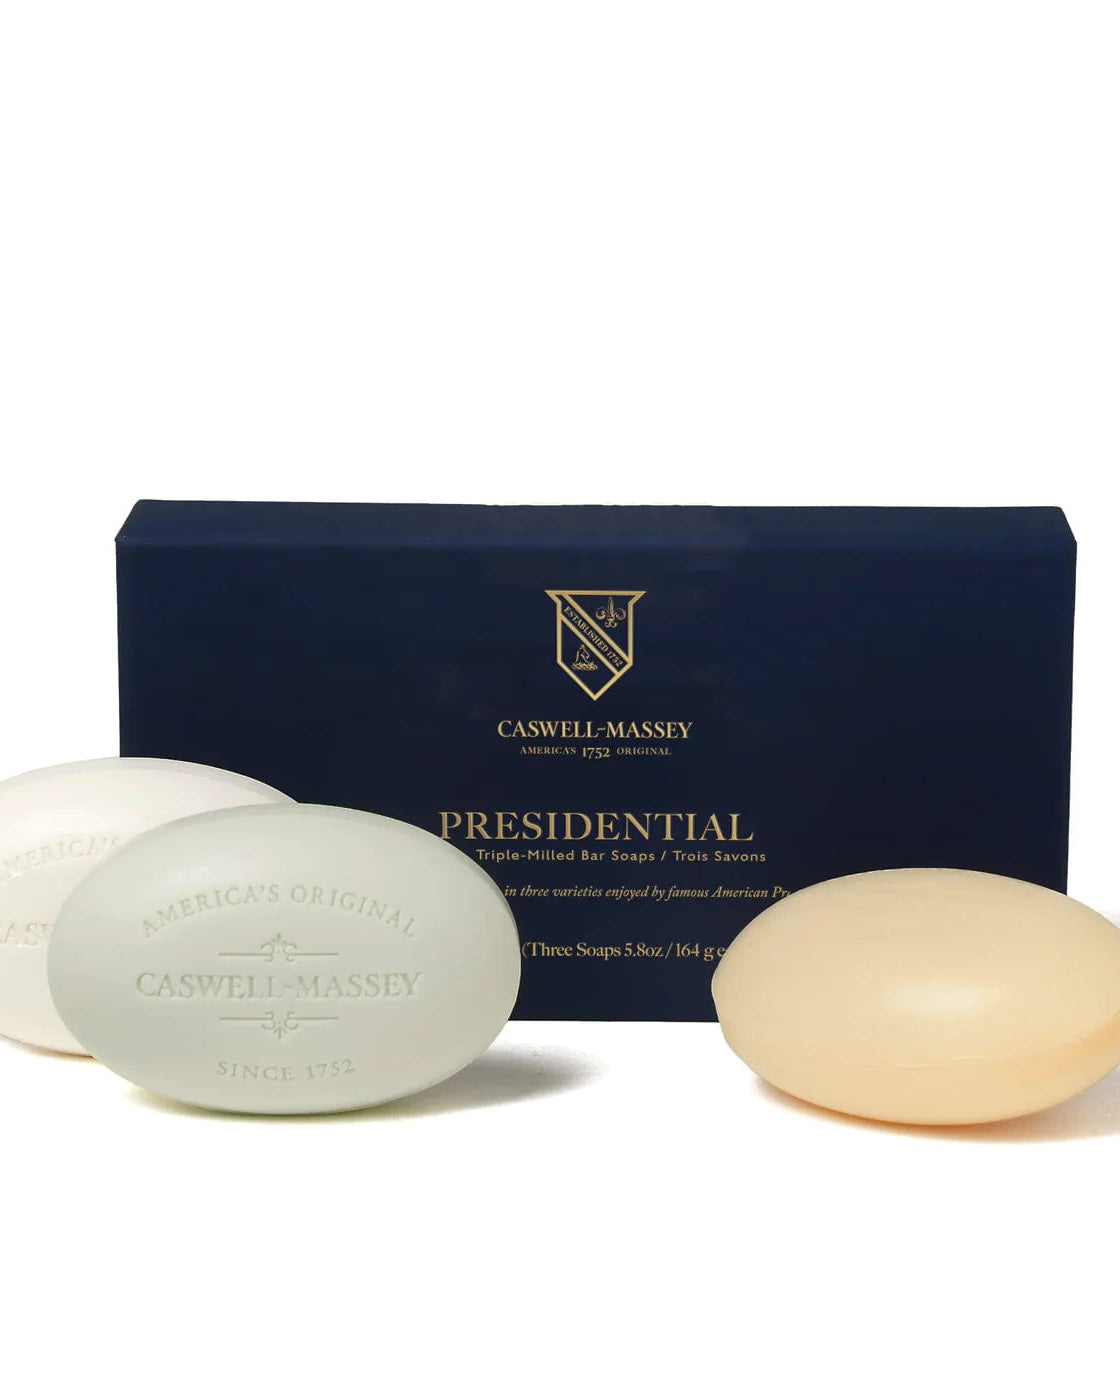 Caswell-Massey Men's Accessories 3-5.8oz Bars Caswell-Massey Presidential Three-Soap Bar Set